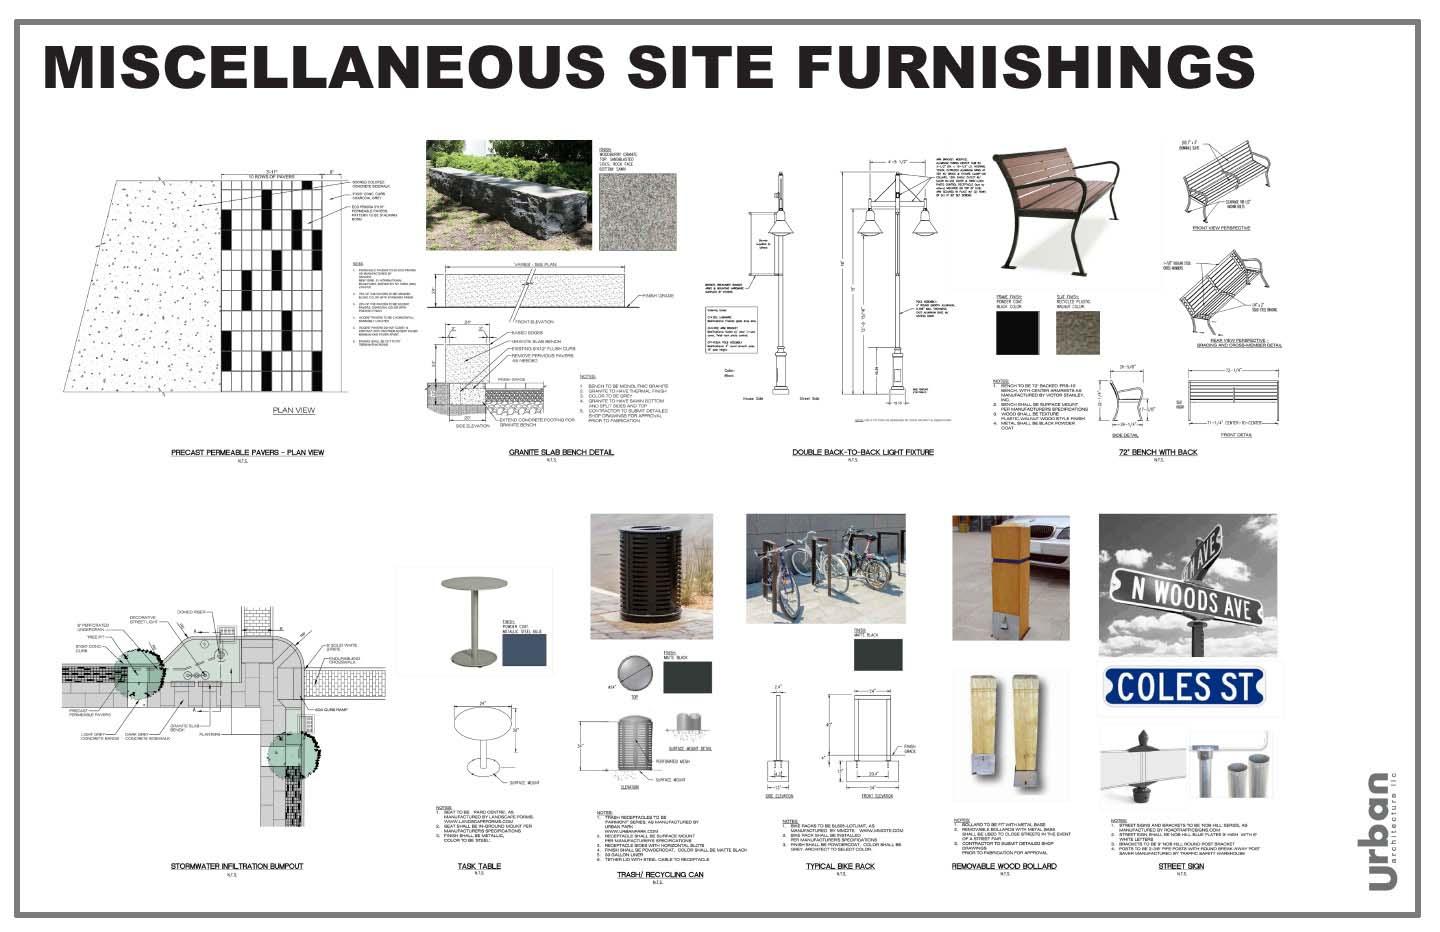 Miscellaneous site furnishings